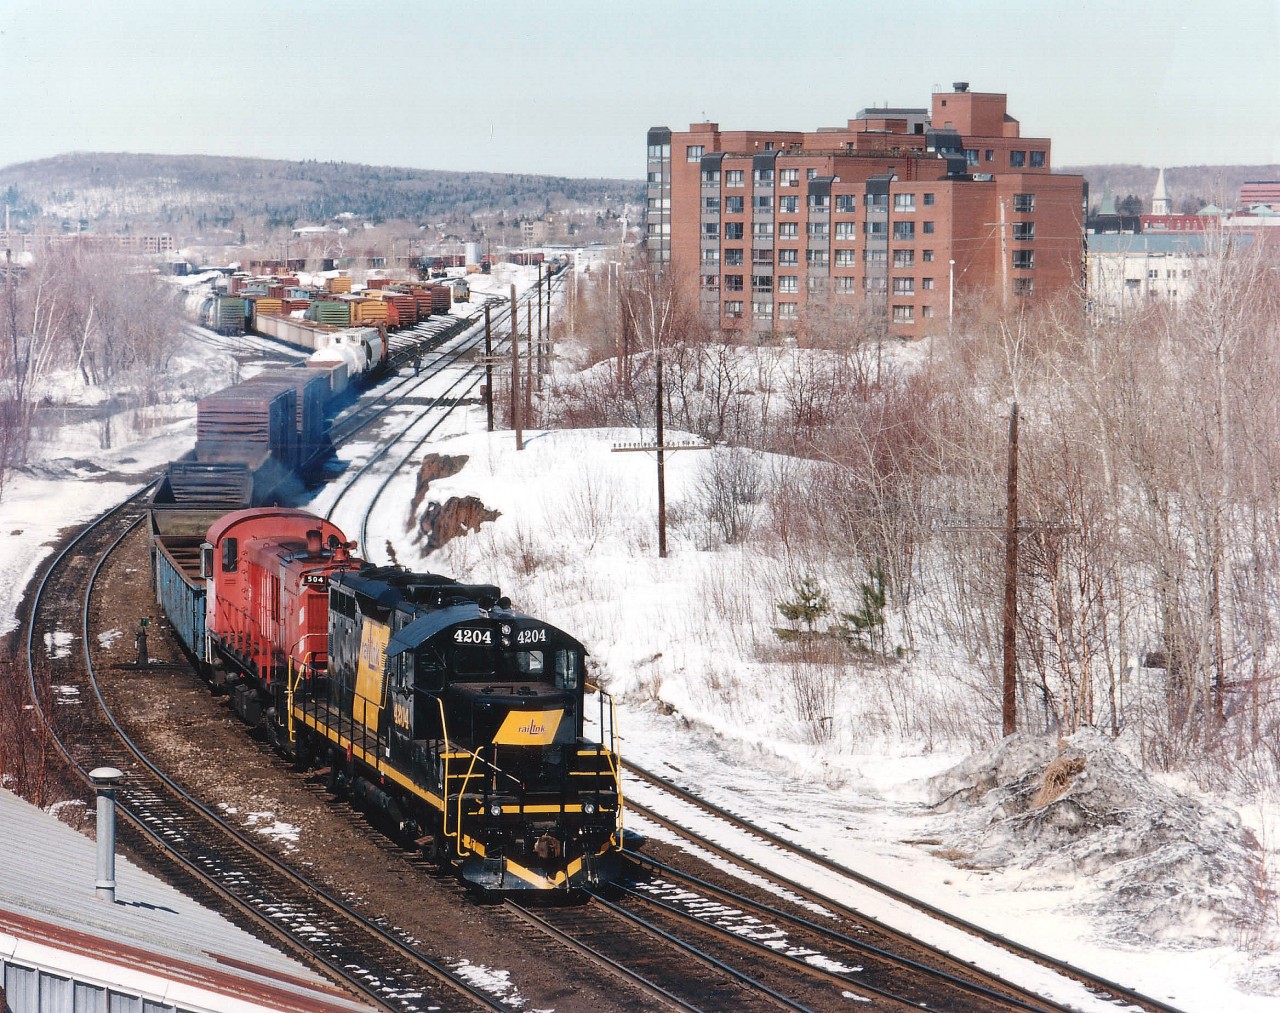 View from Main St. overpass looking NW toward the former Ottawa Valley(CP) yard that has now been moved south of the city in order to free up valuable waterfront/downtown lands. OVR 4204 and OSRX 504 are seen working a long cut of cars. The 4204 was acquired in 1996 and shortly after this photo was taken departed for Lakeland and Waterways startup in Alberta that September. It has since been retired. The second unit, former CP 8044, renumbered 504 assigned Guelph Jct Rwy, was on loan. It today still smokes-up on the GJR.